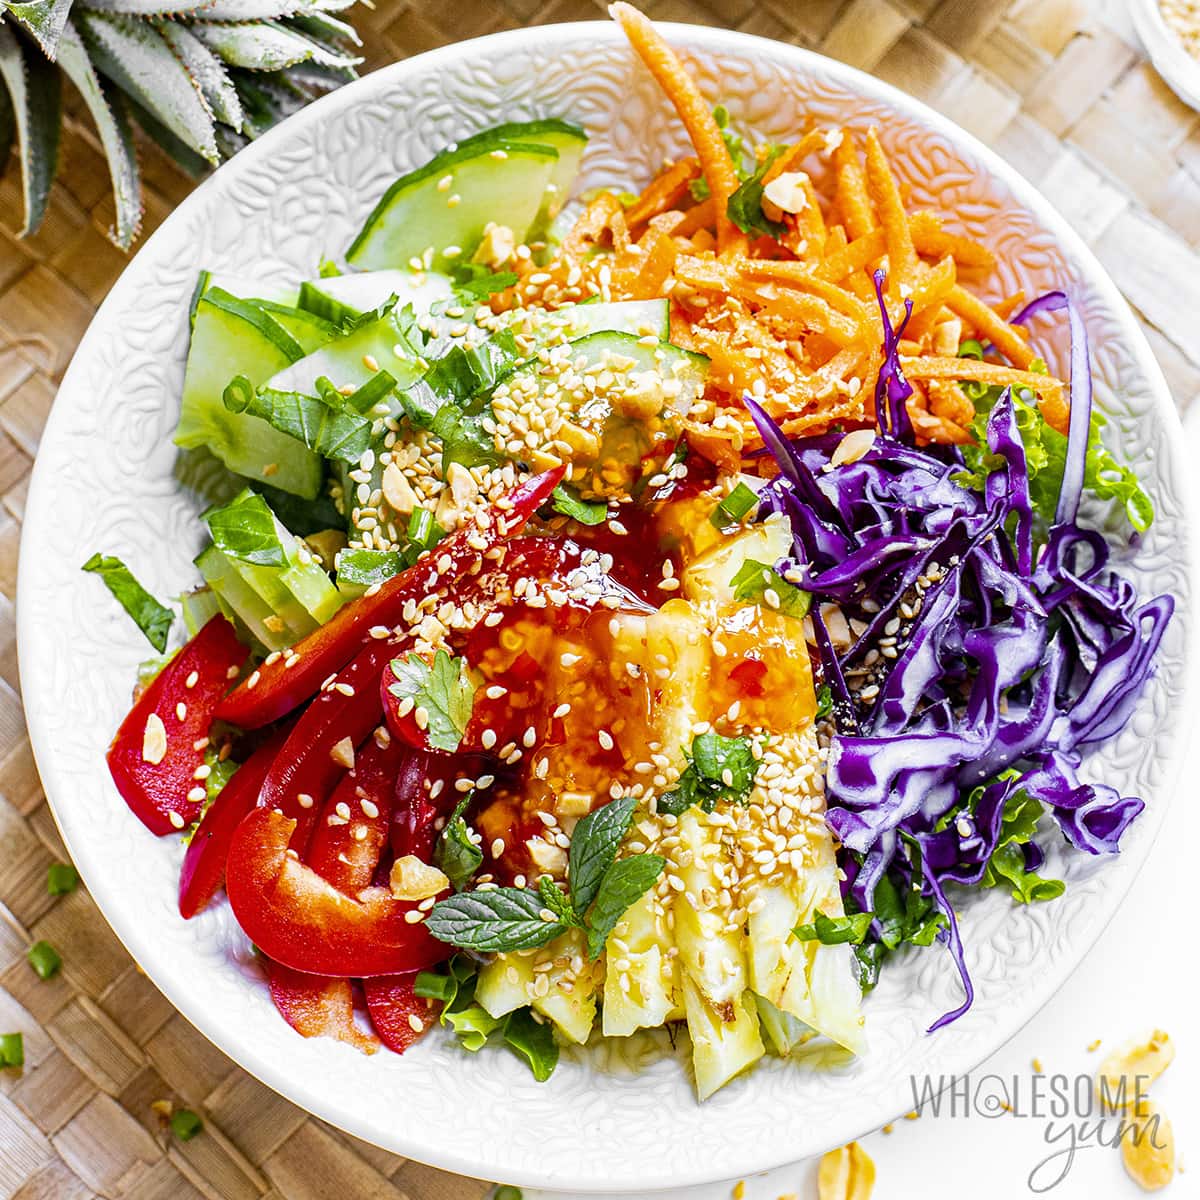 Thai peanut salad drizzled with dressing.